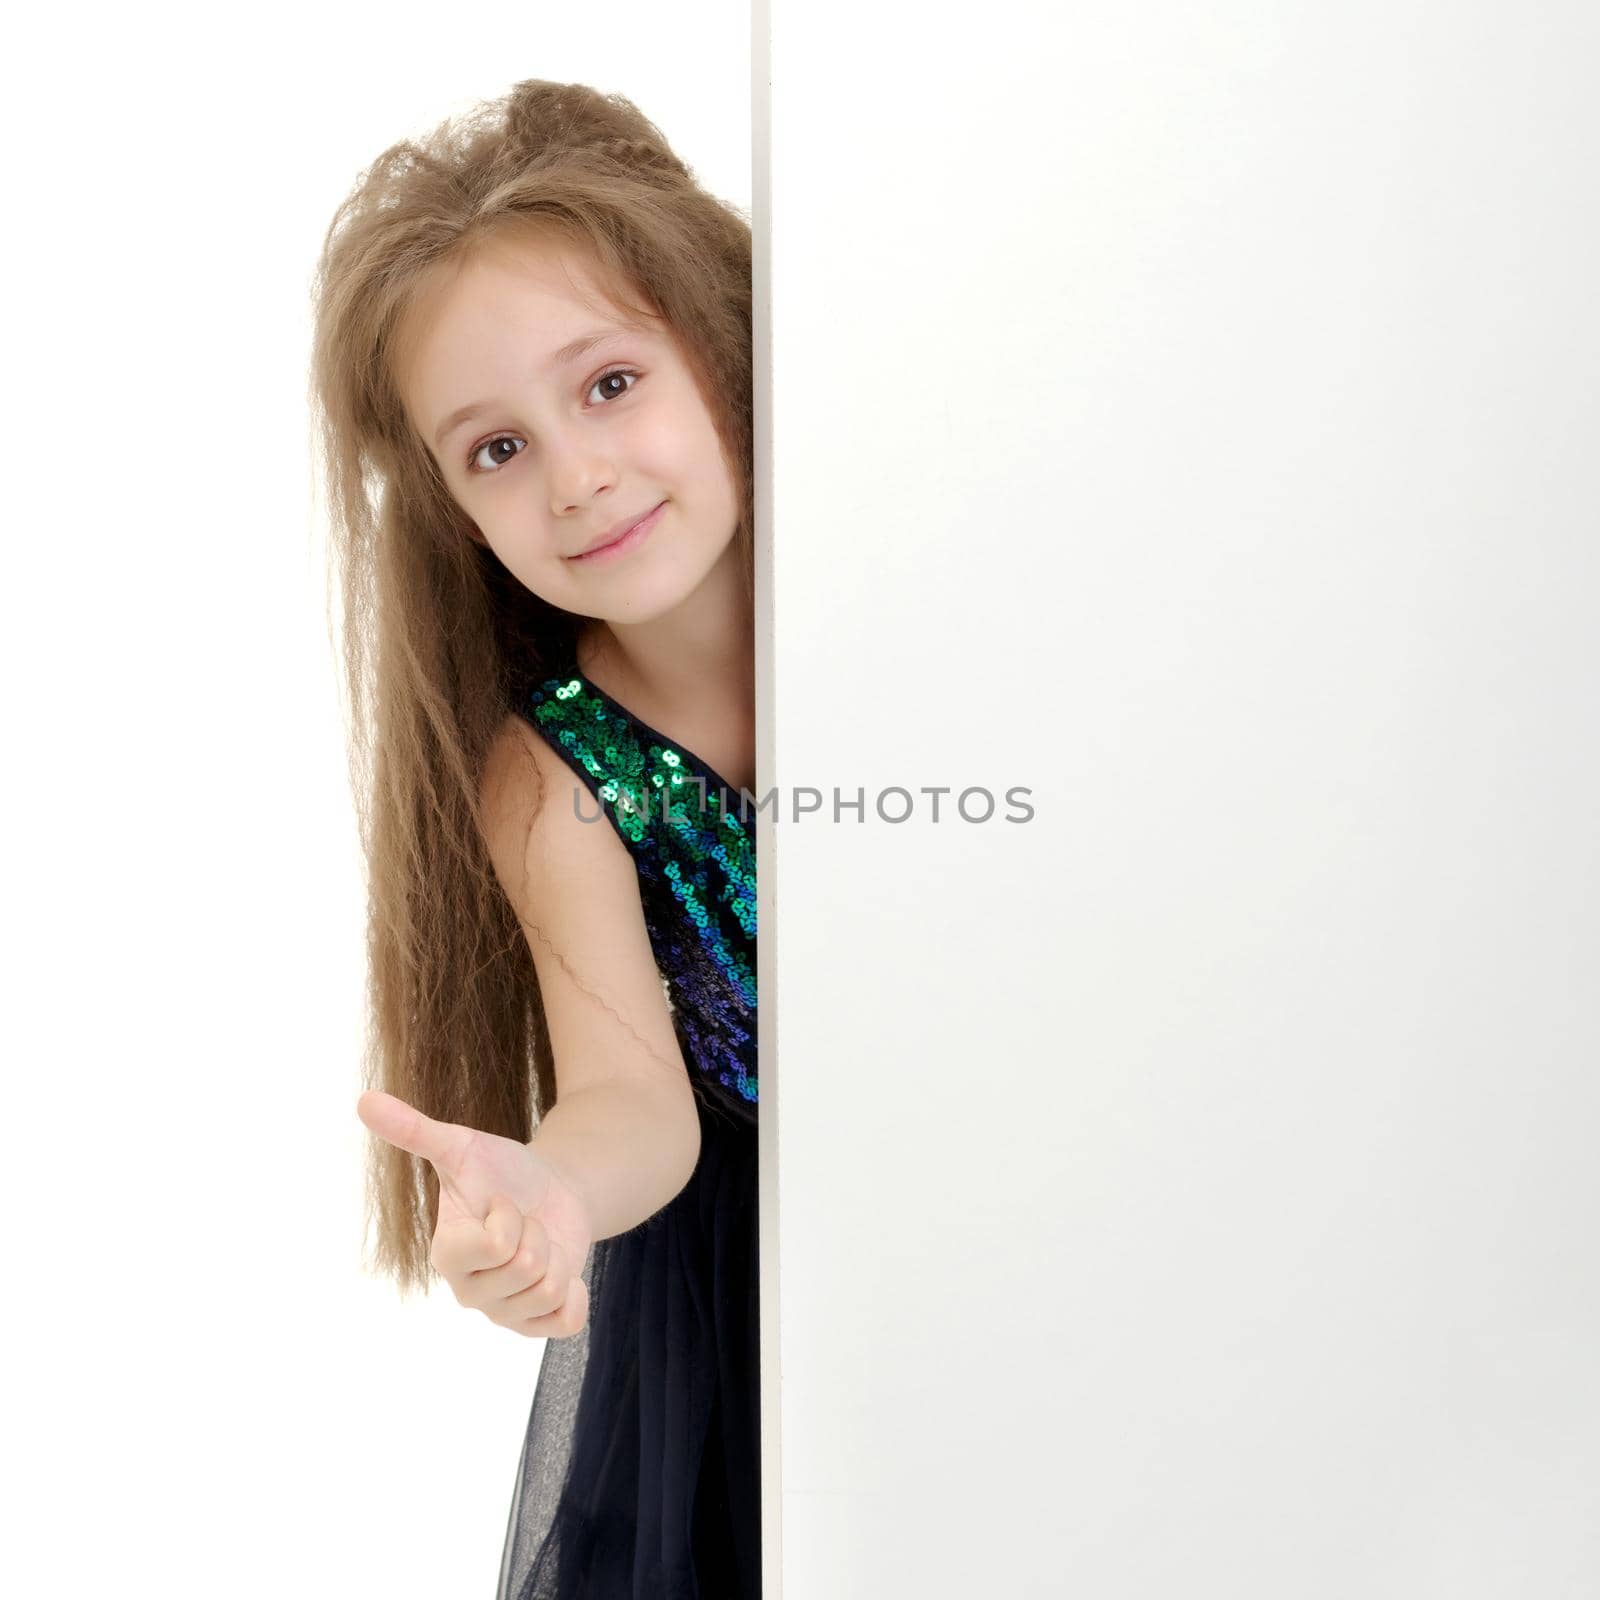 A nice little girl is looking because of an empty banner in which you can insert any text. The concept of a happy childhood, advertising, selling goods. Isolated on white background.